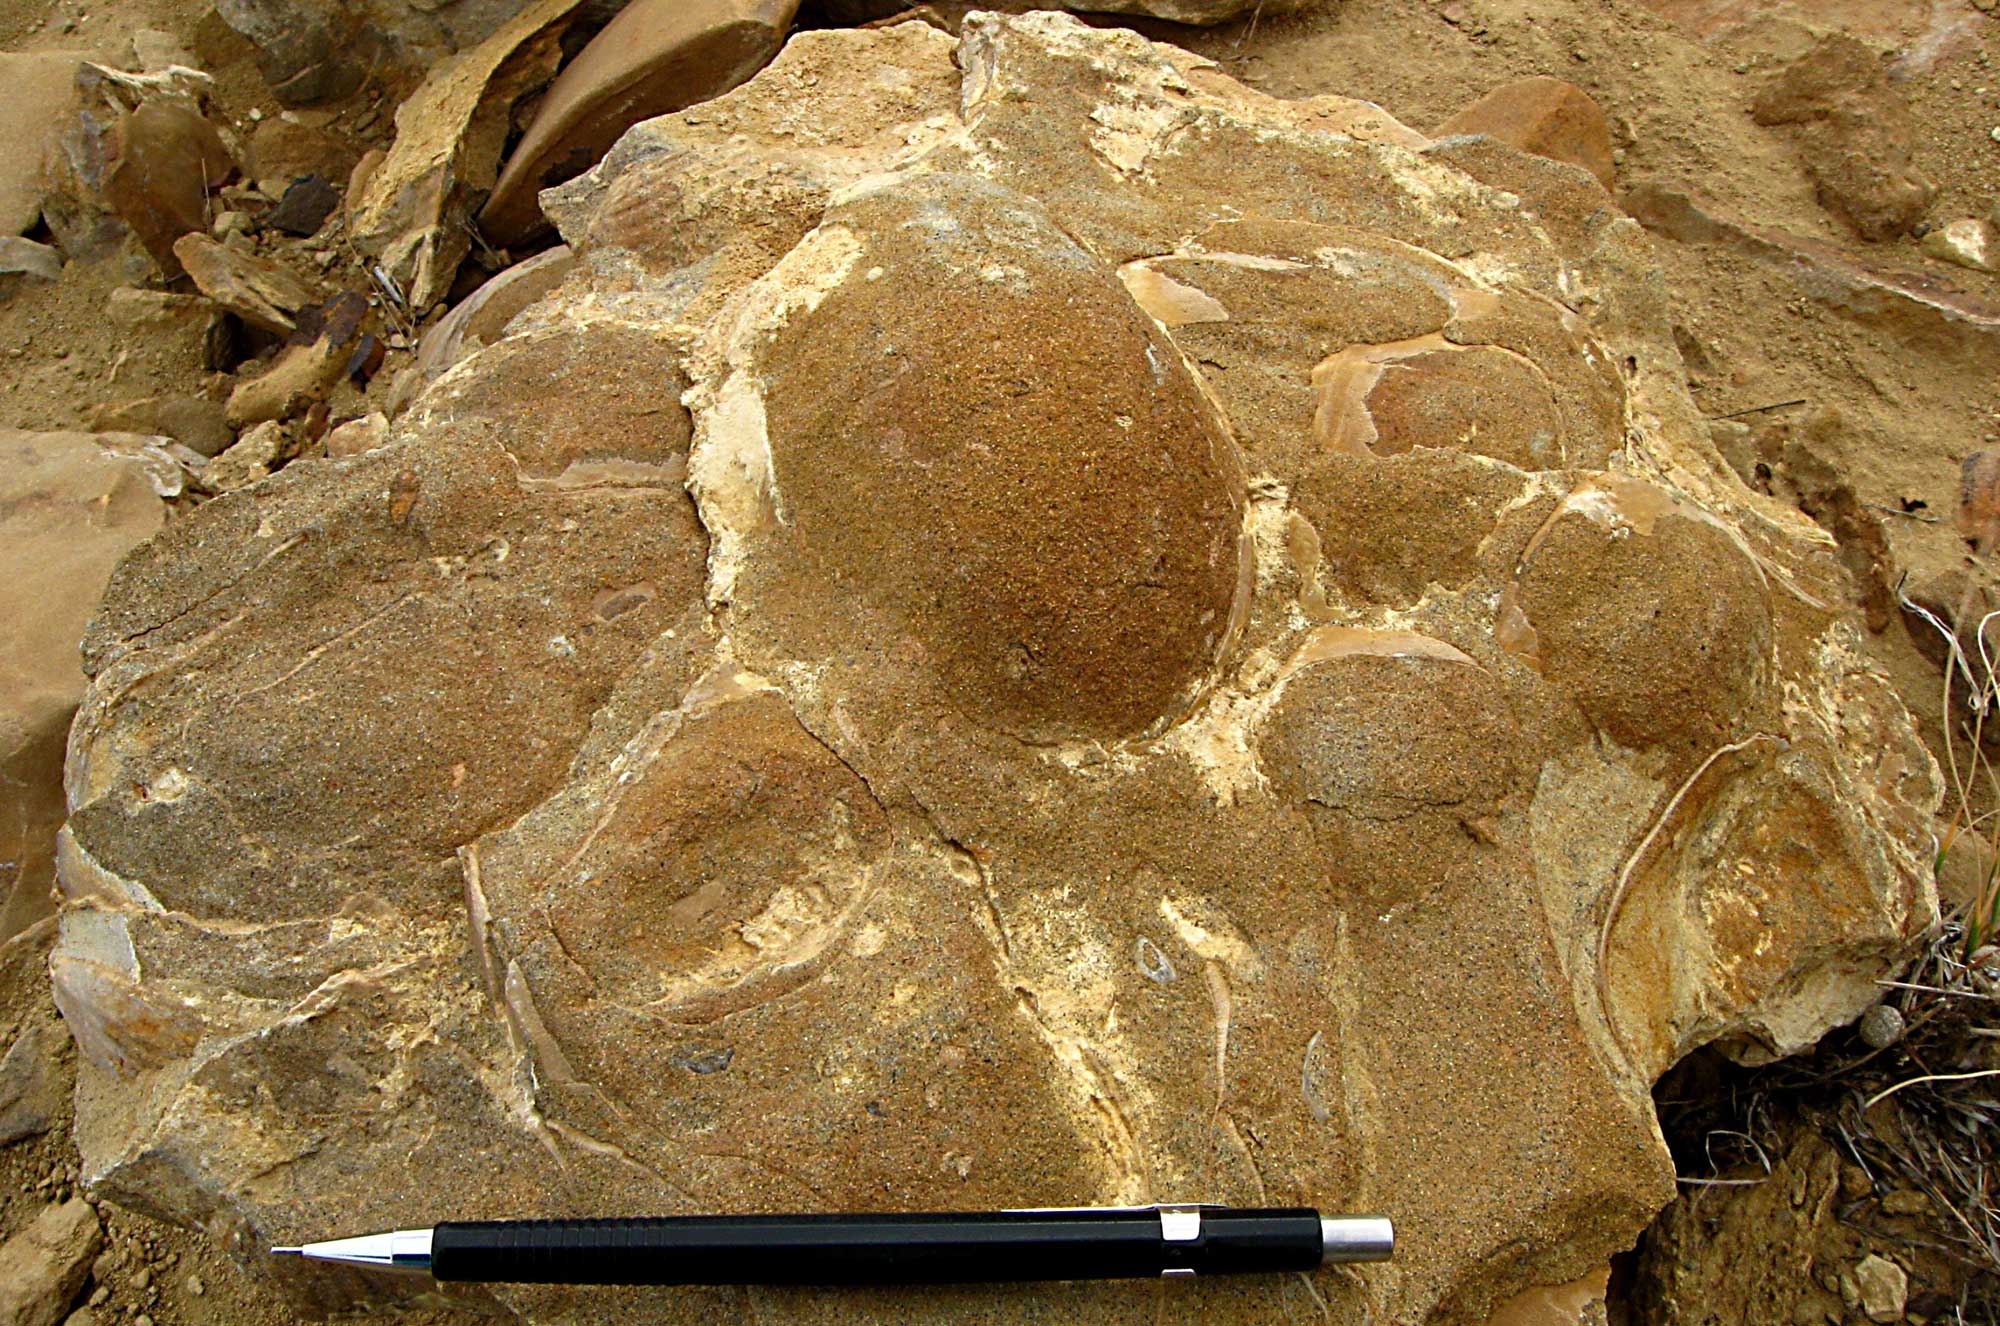 Photograph of fossil oysters from the Cretaceous Cliffhouse Sandstone, New Mexico. The photo shows some specimens with shells and some that are just rounded internal molds. A mechanical pencil is used for scale (shells are about as long as the pencil or shorter).